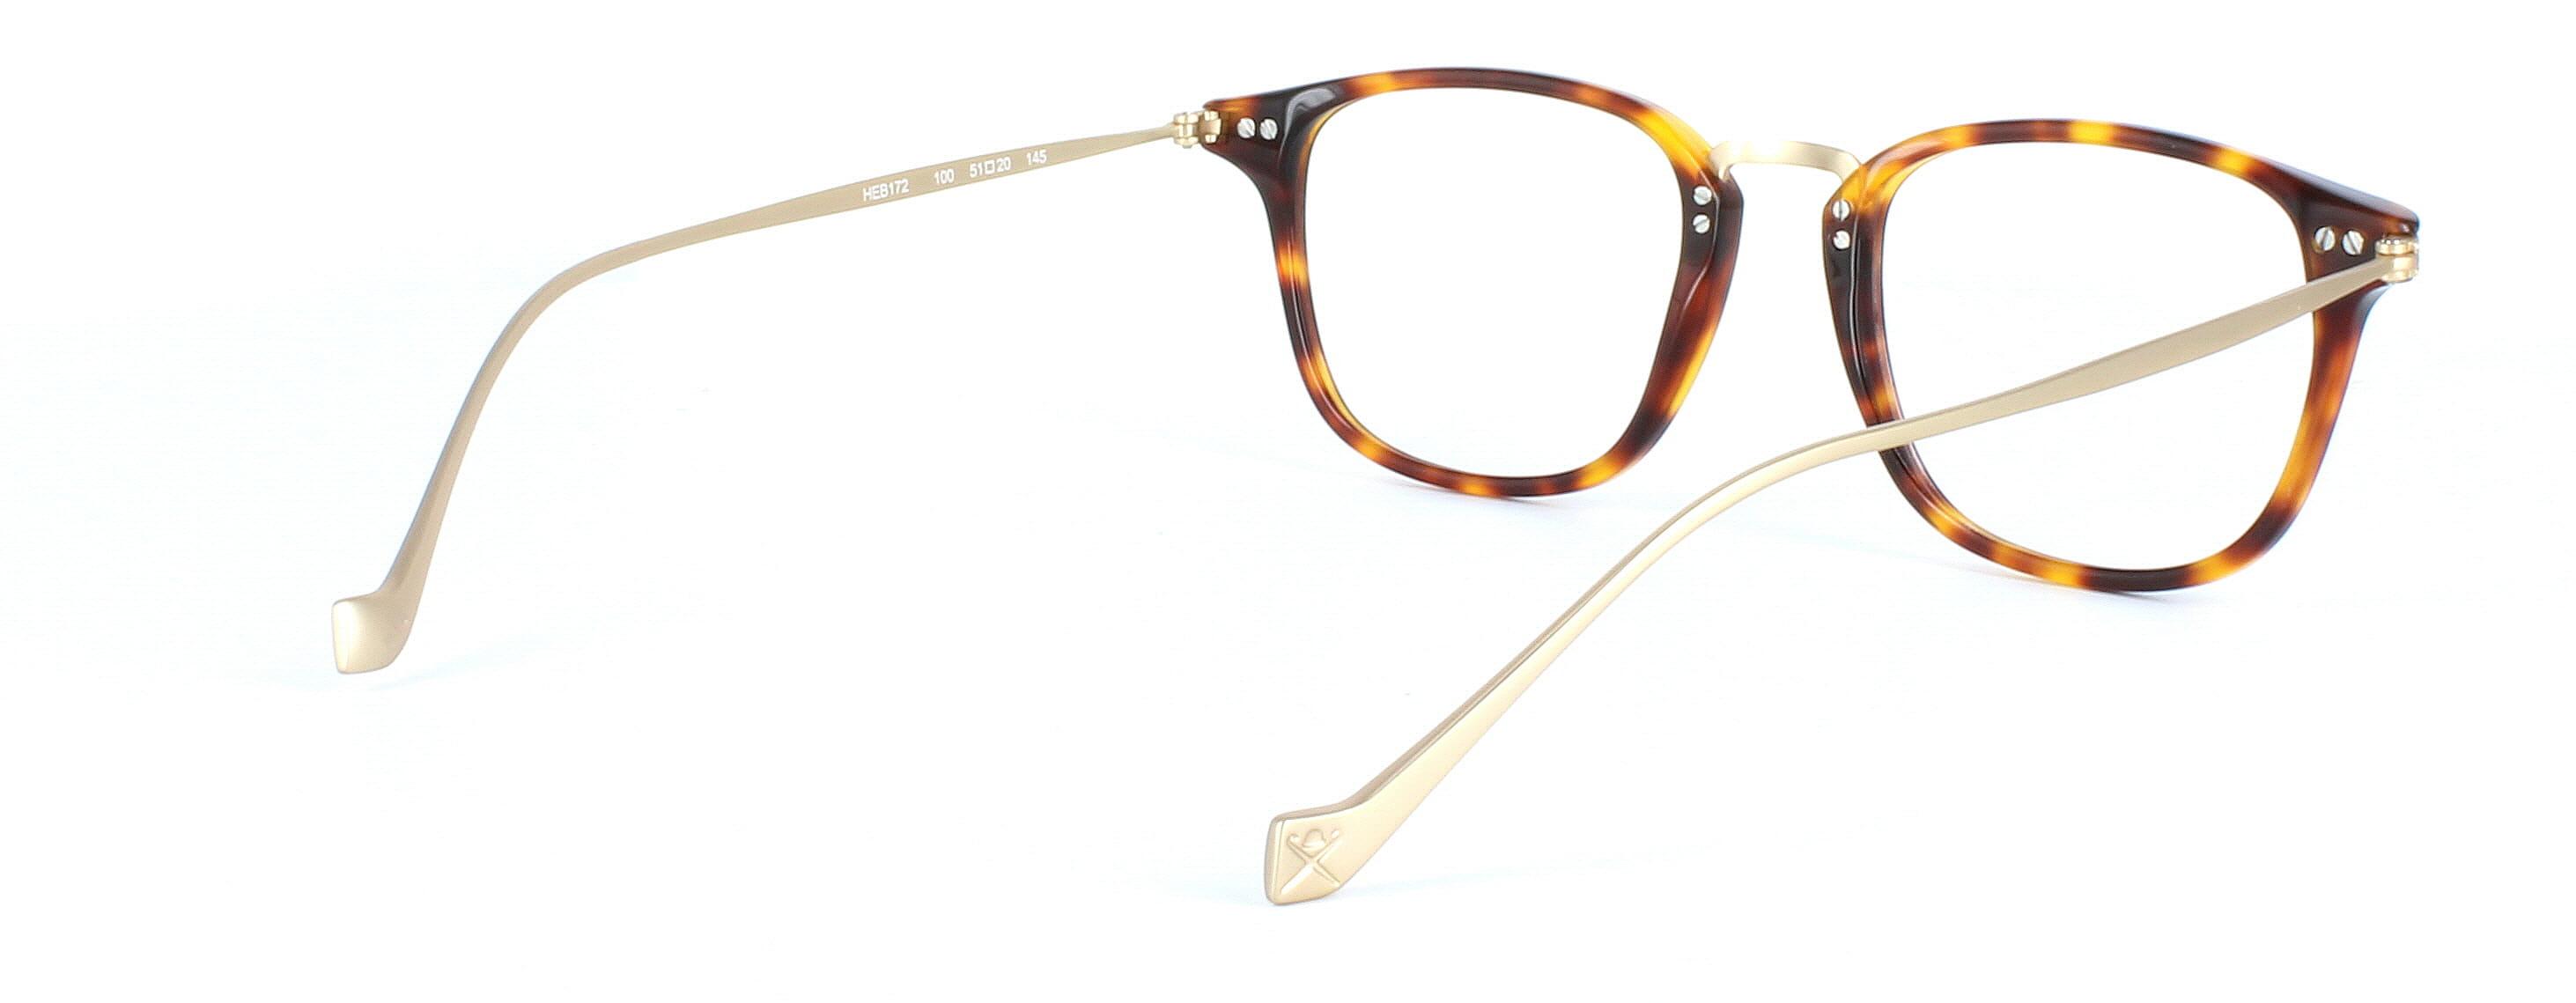 Hackett 172 - Unisex acetate and metal glasses frame in tortoise and gold - image 4